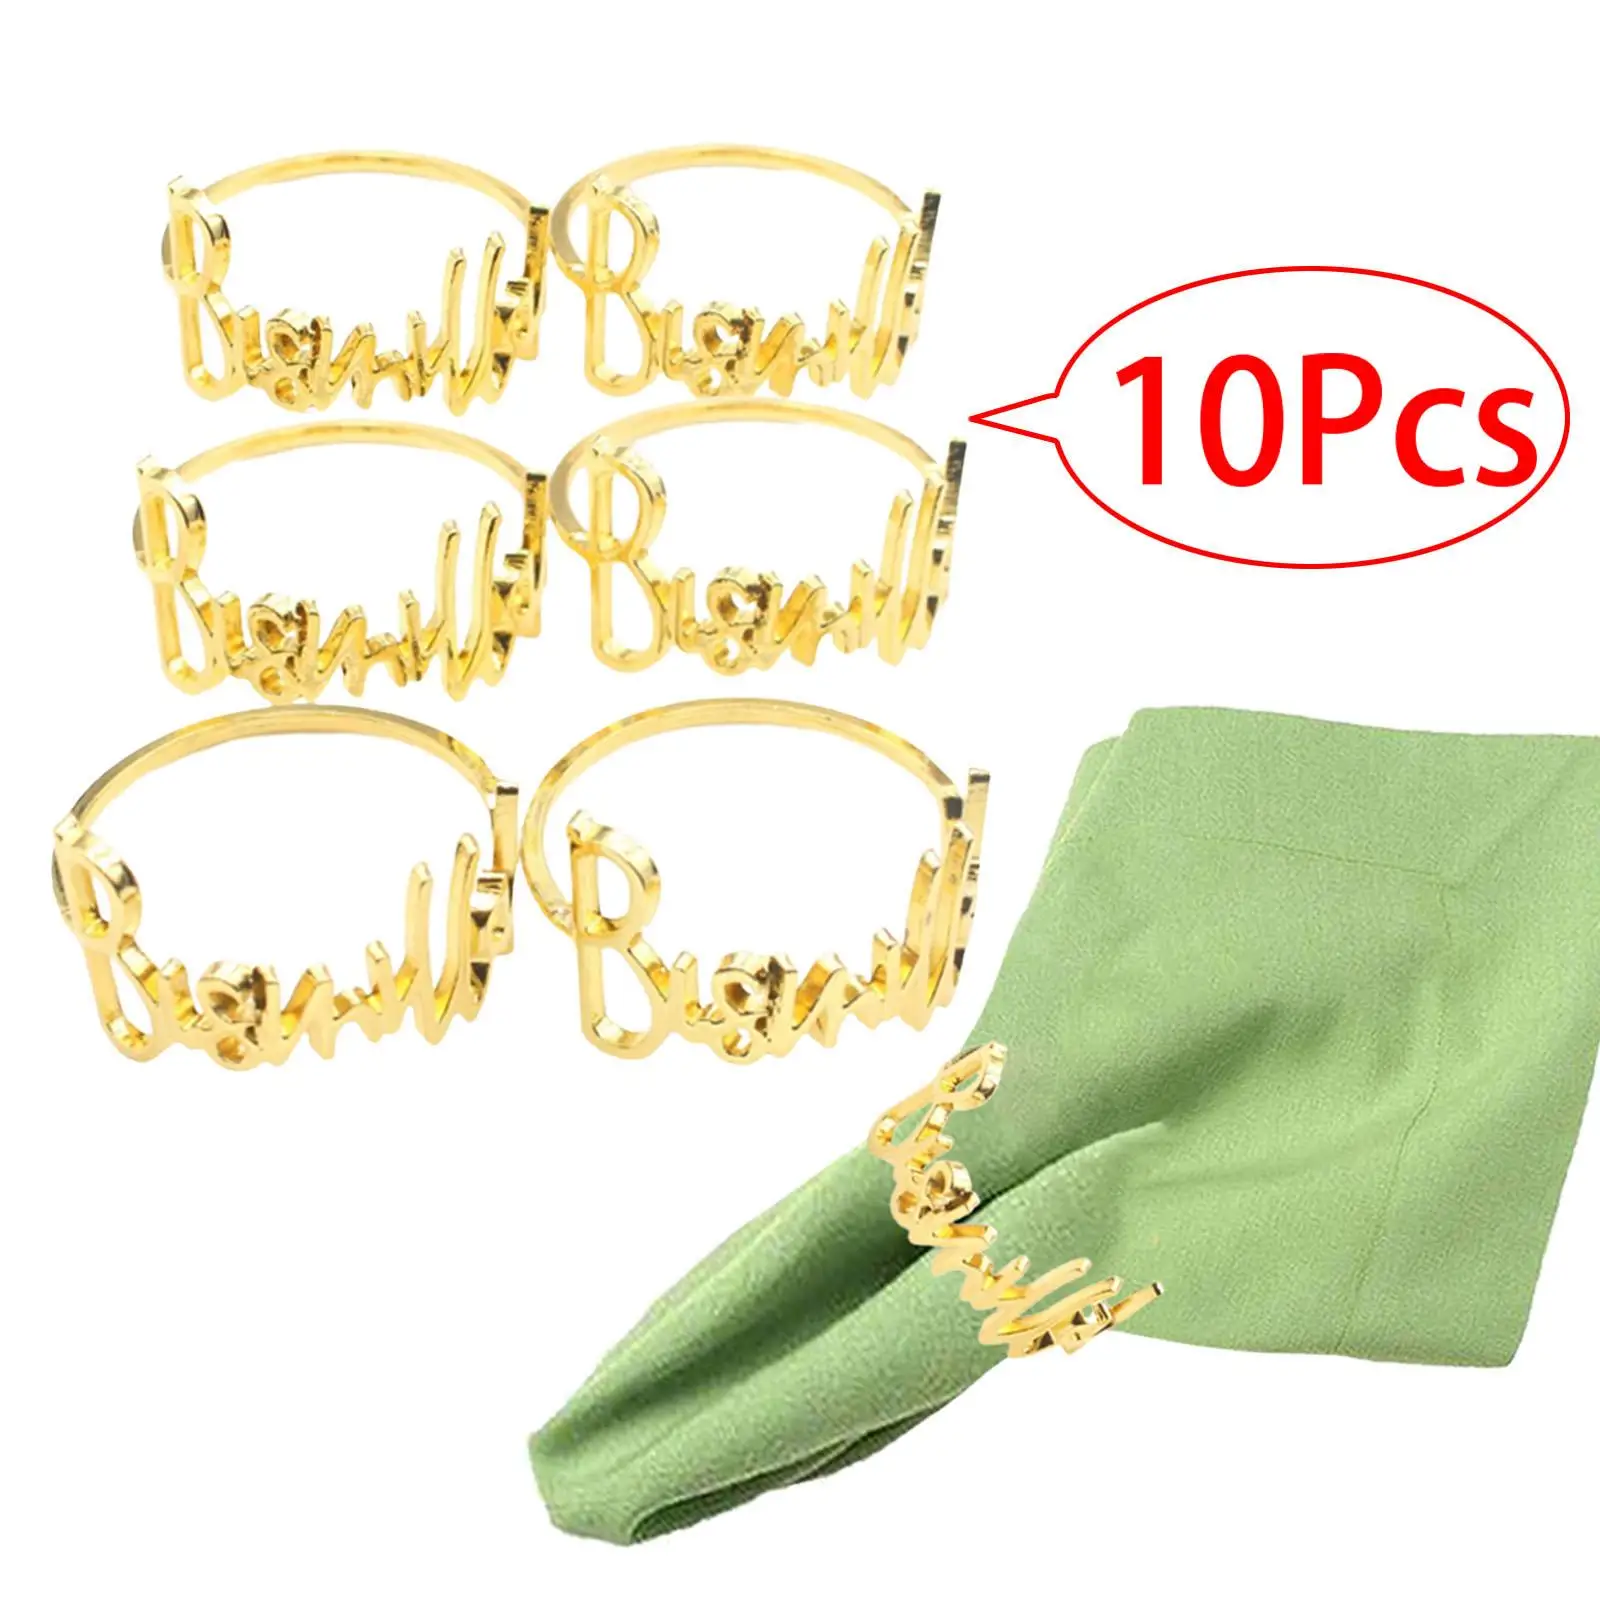 10 Pieces Napkin Buckles Adornment Round Decorative for Holiday Banquet